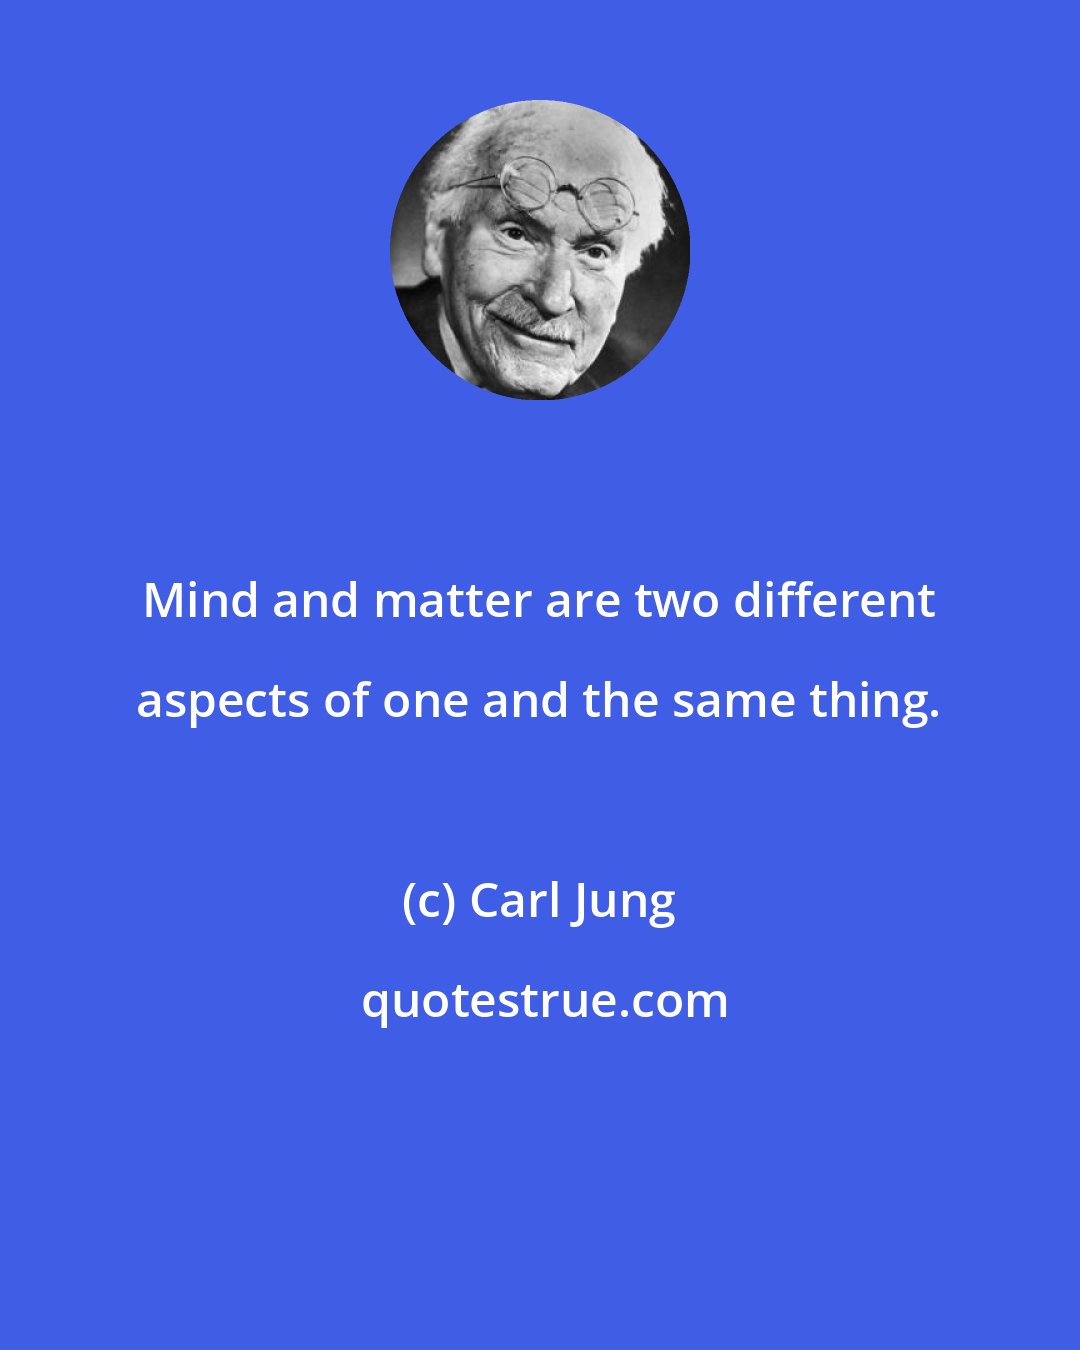 Carl Jung: Mind and matter are two different aspects of one and the same thing.